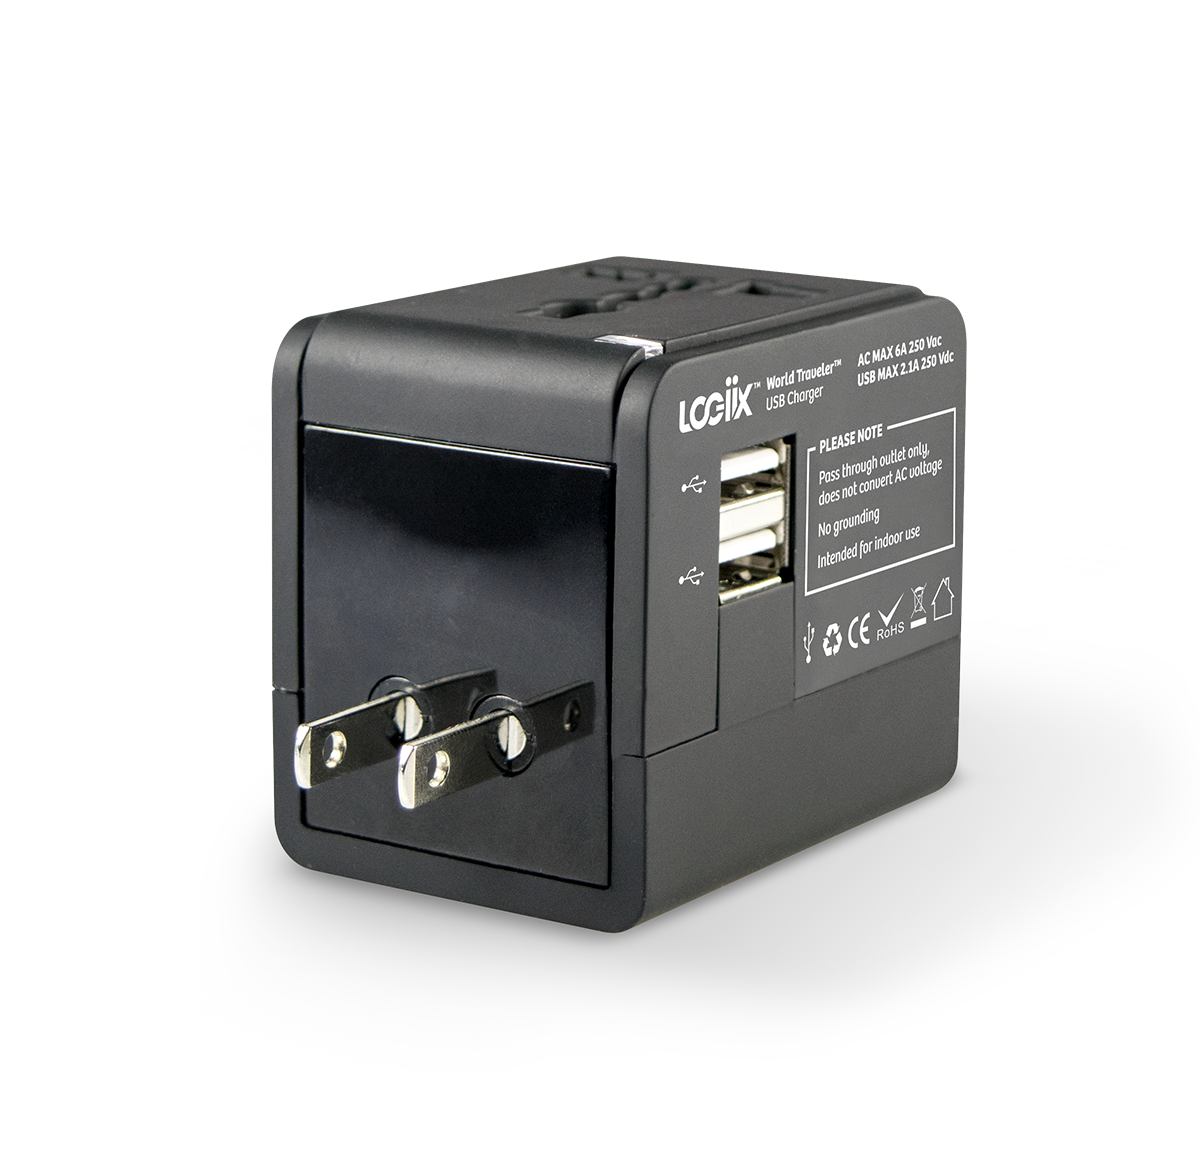 This is a black universal travel adapter. It works in the UK, Europe & USA/Australia. This travel adapter comes with a universal plug adapter for use in over 150 countries. Comes with a built in USB charger.